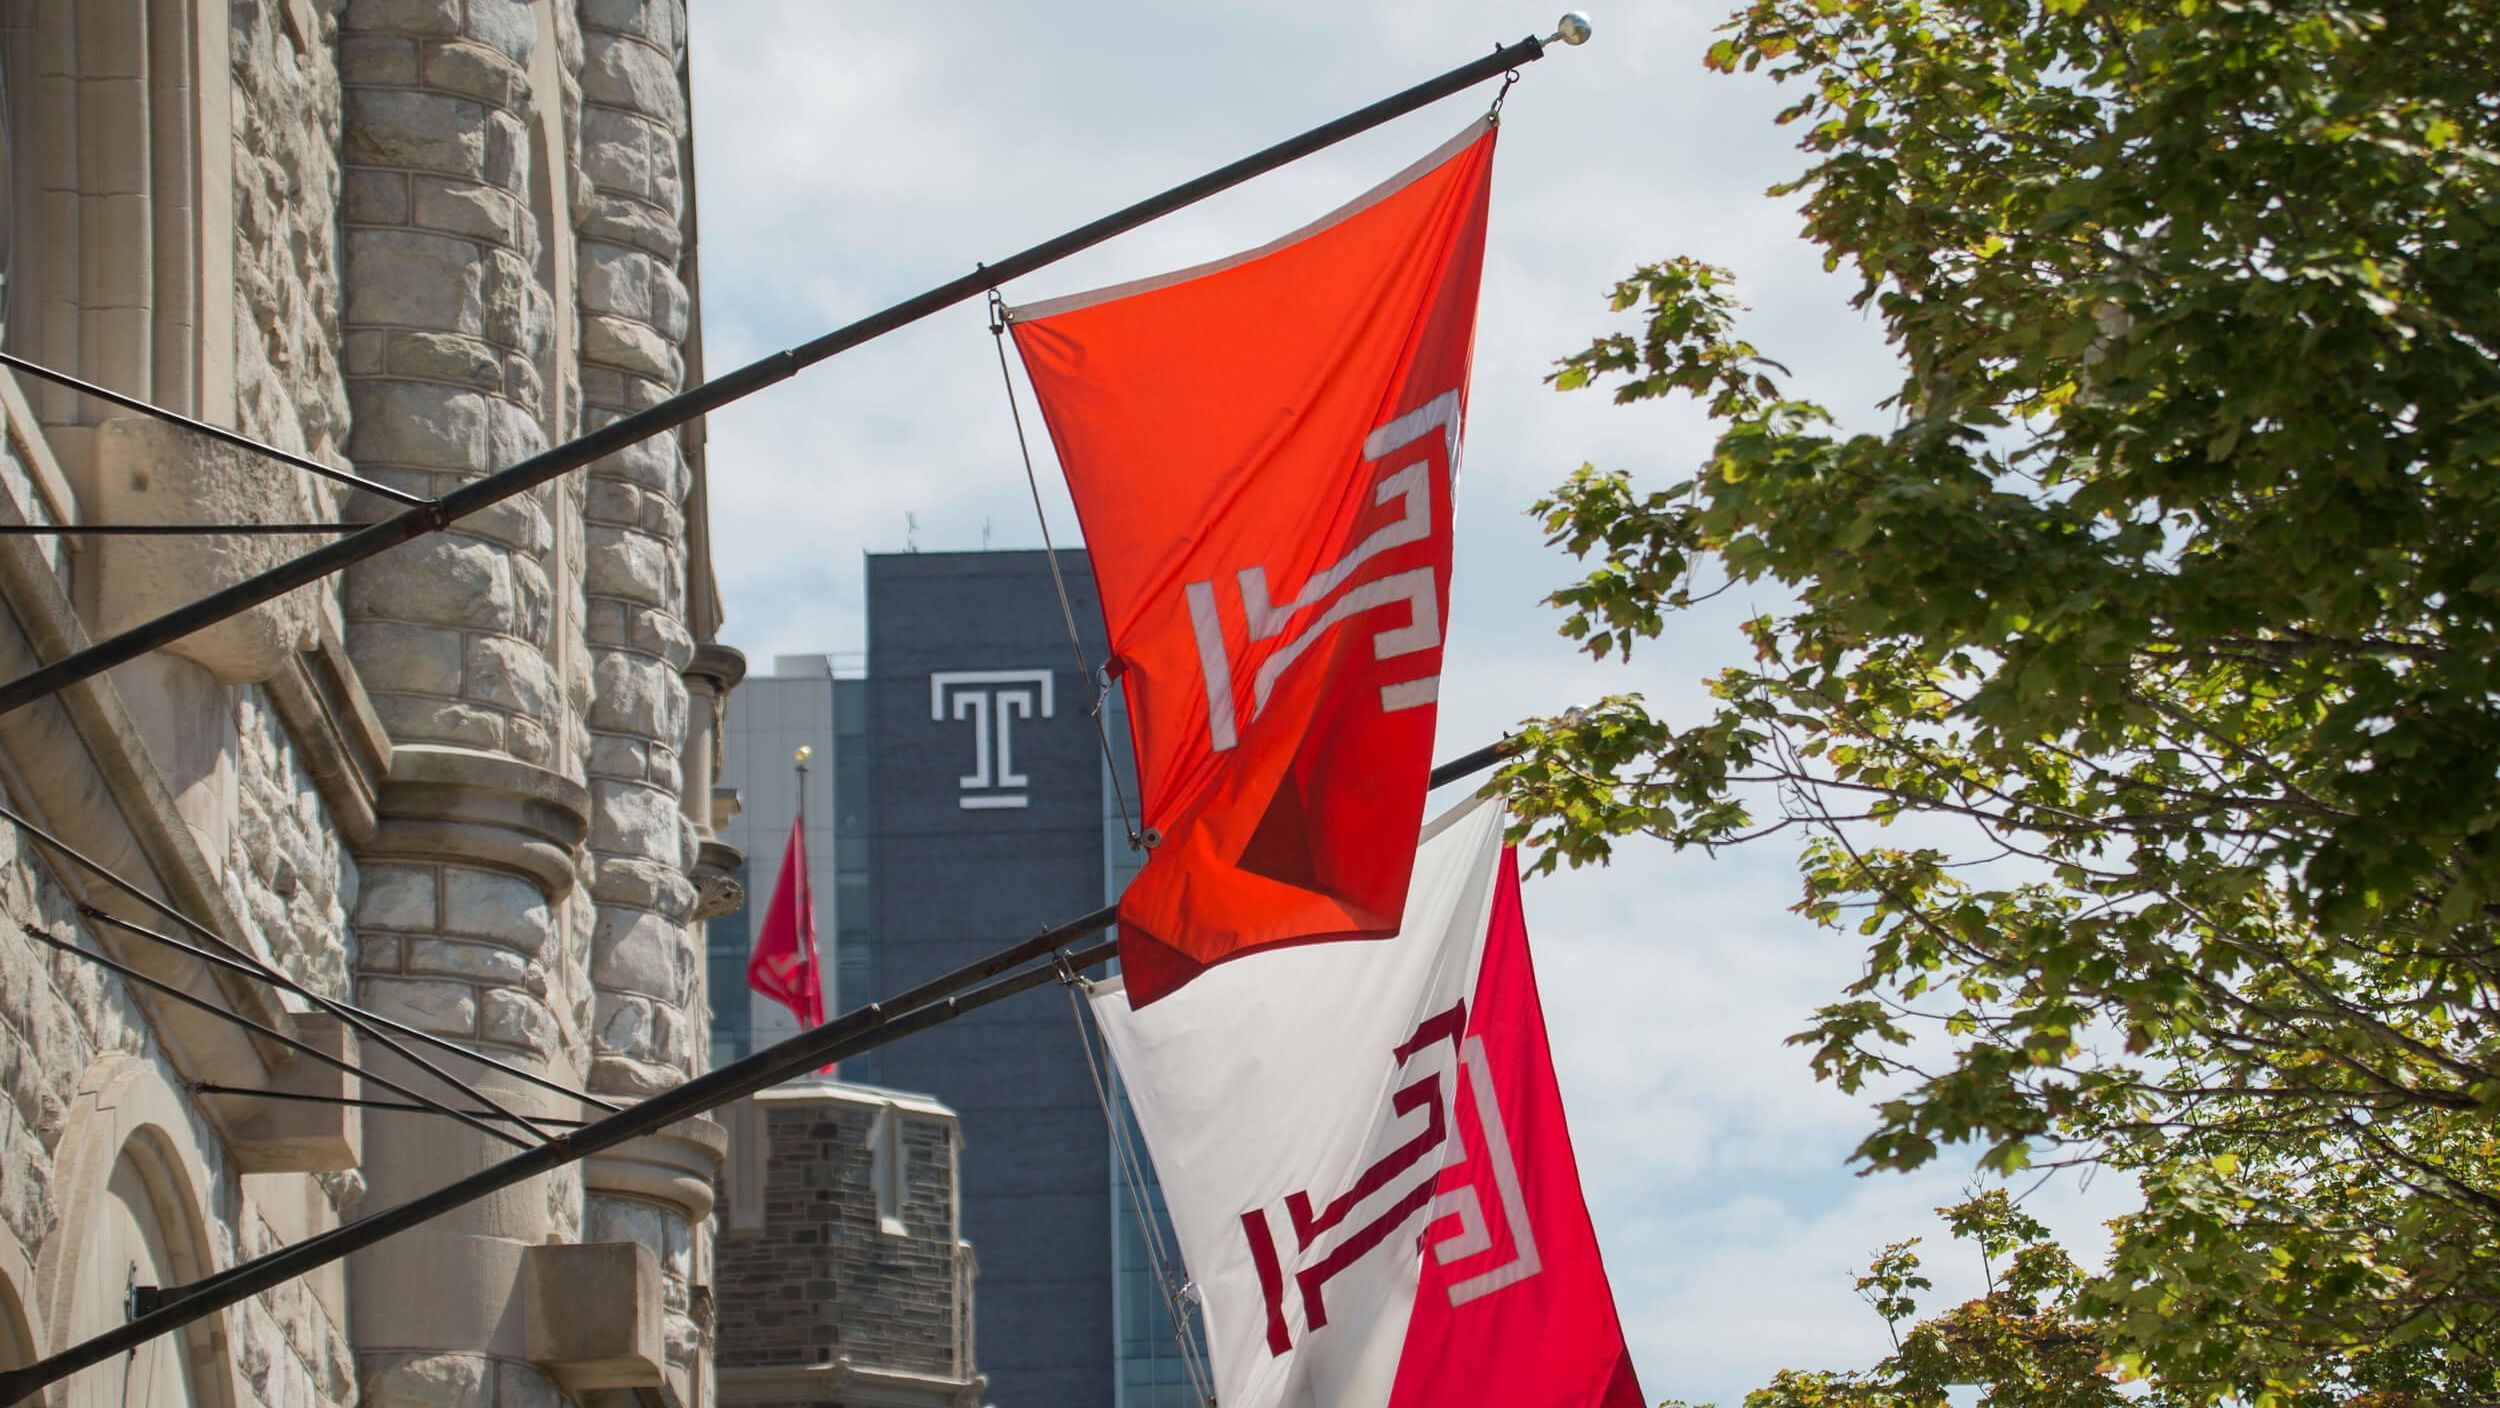 Temple flags flying on campus.